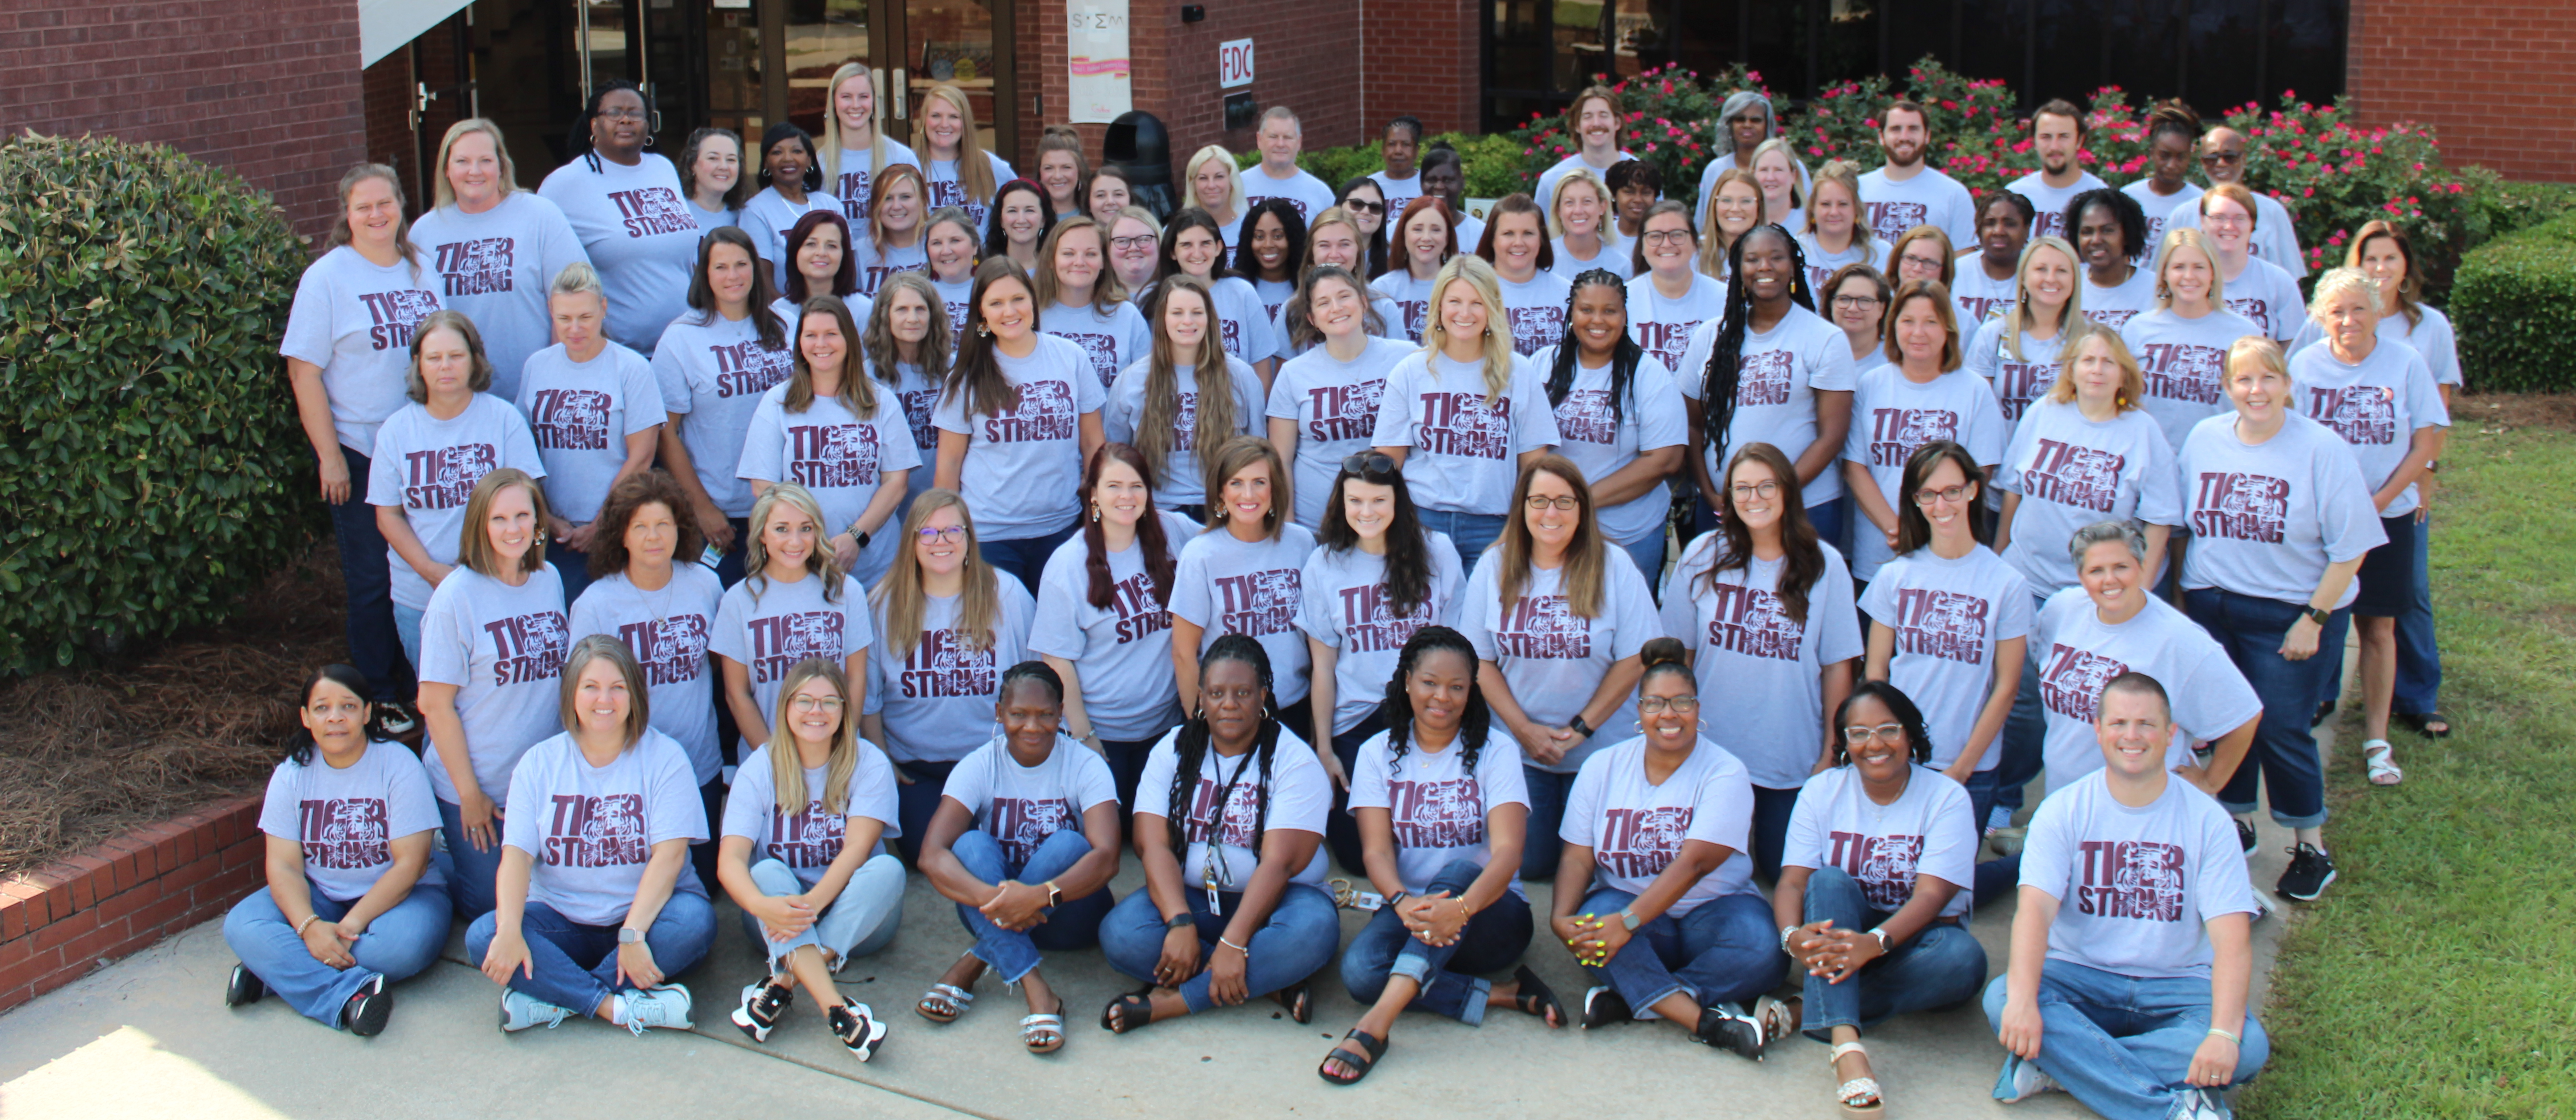 Hubbard staff photo in front of school